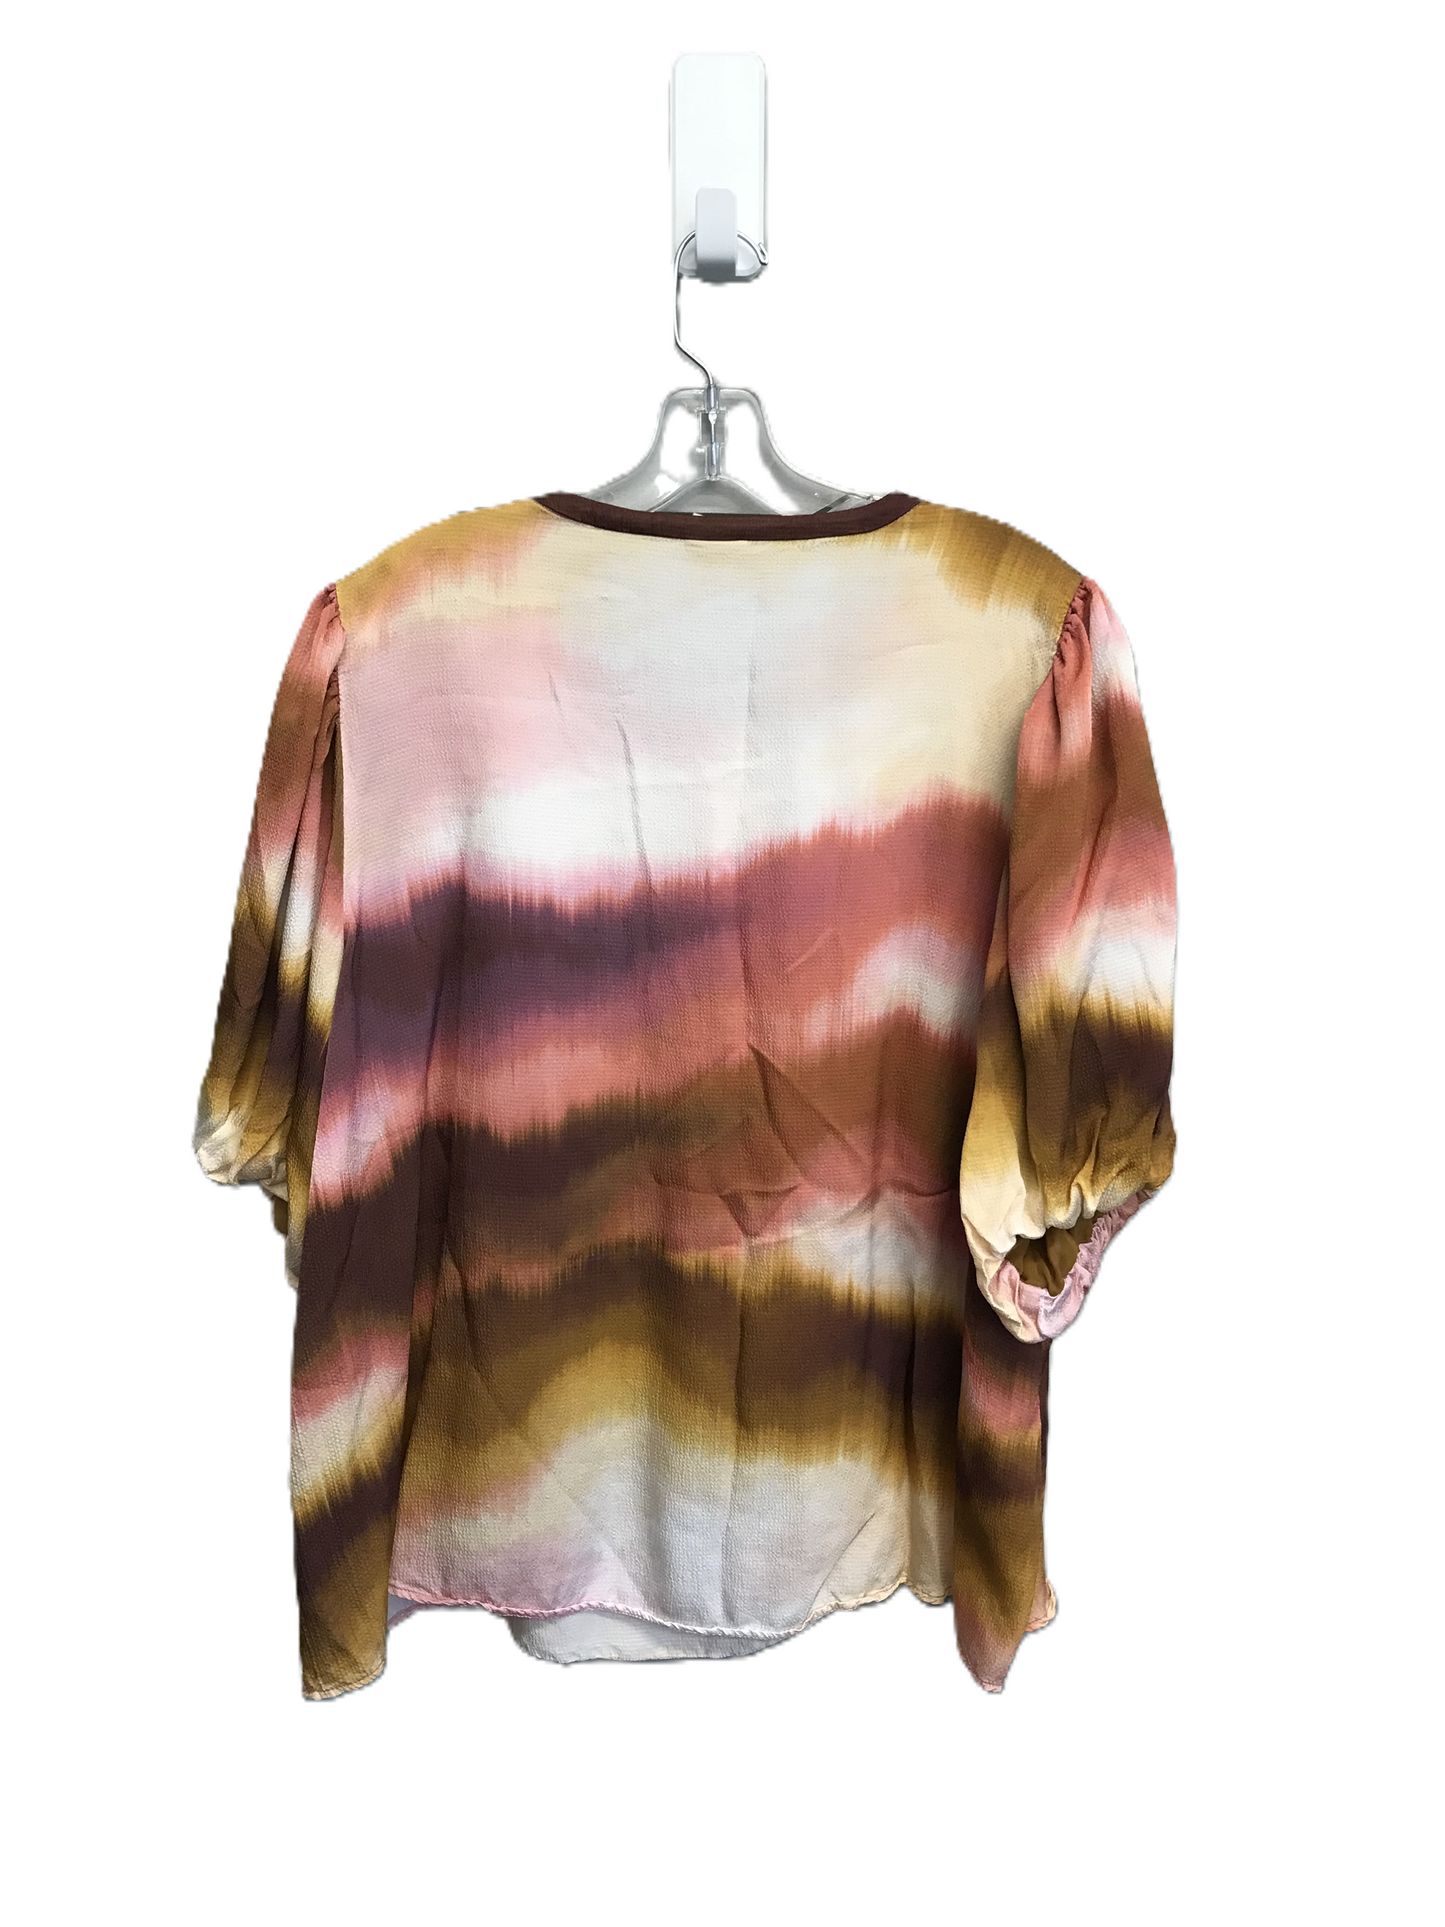 Multi-colored Top Short Sleeve By Good Hart Size: 1x